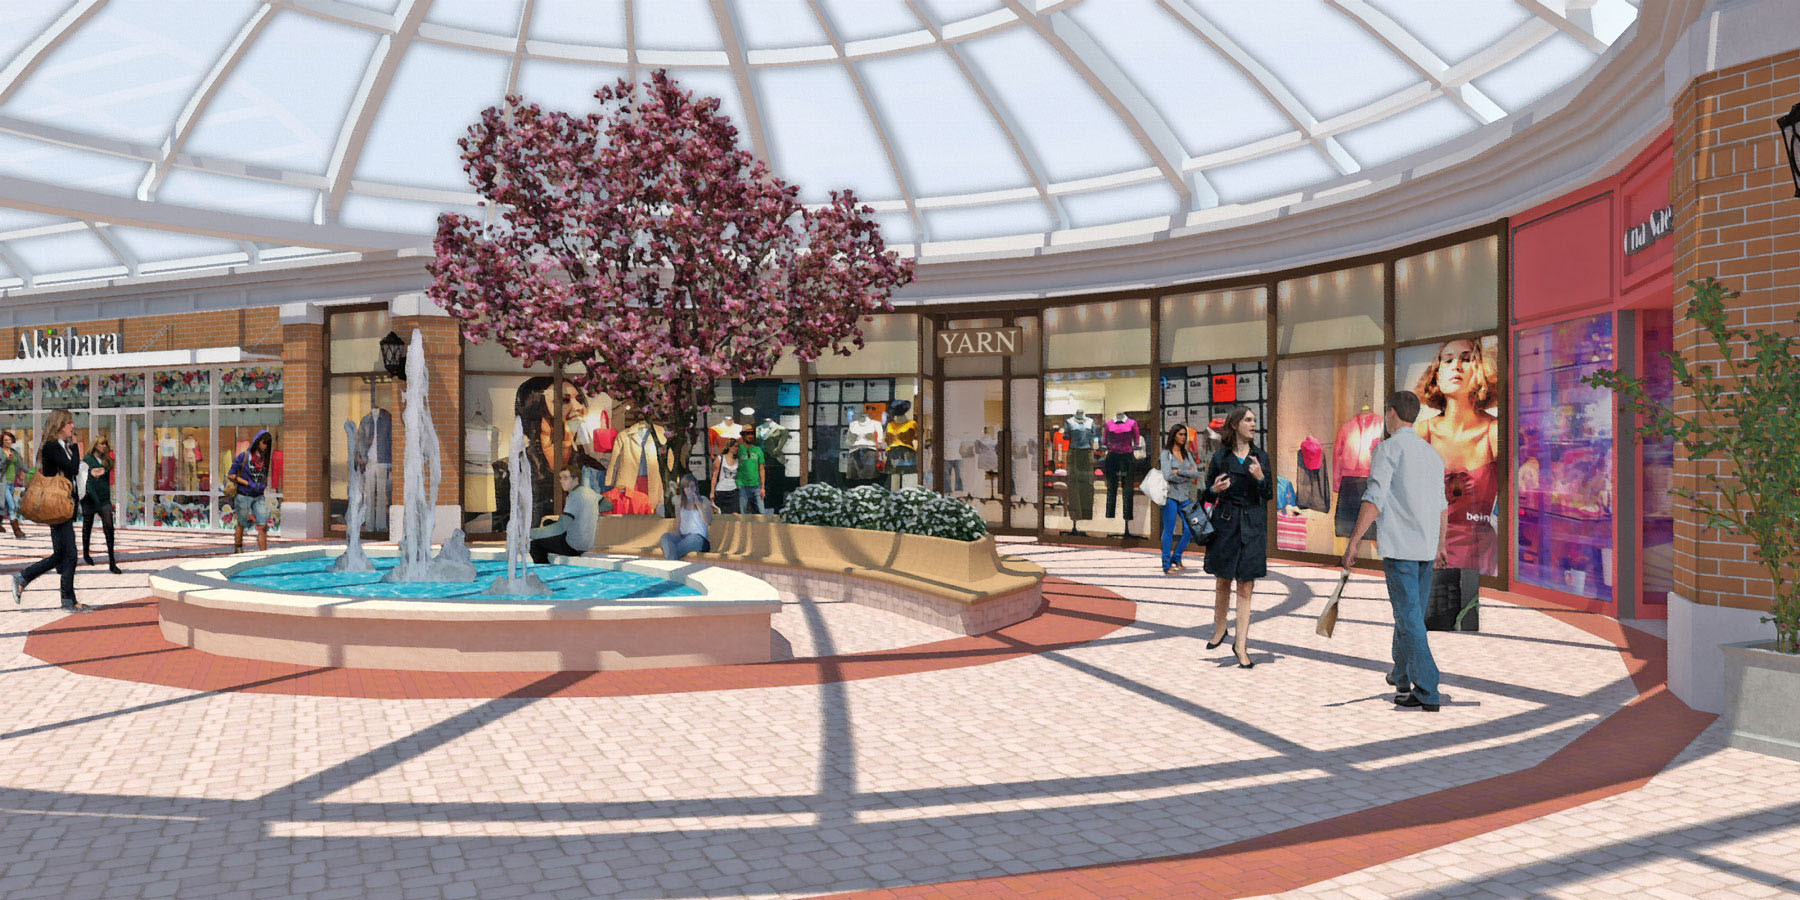 List Of Designer Shops Announced For New Foxwoods Outlet Mall - Hartford Courant